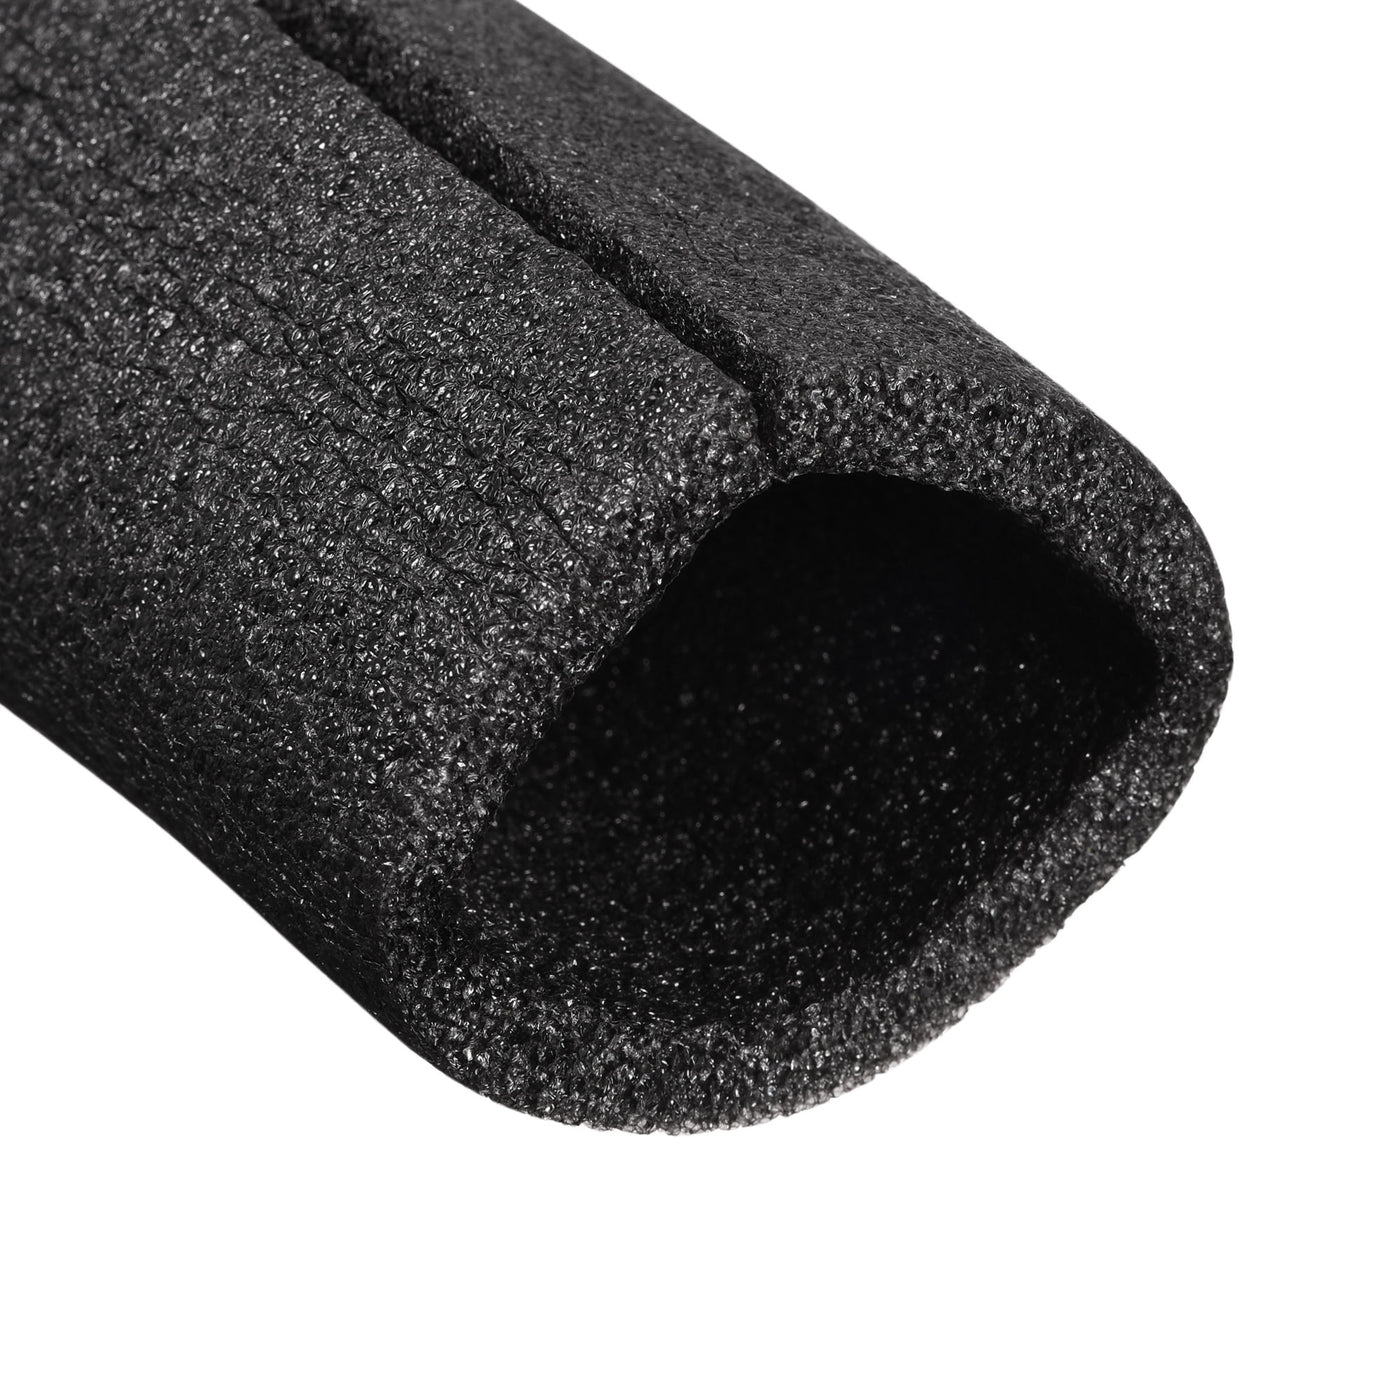 Uxcell Uxcell Foam Tube 1.64 Ft Length 2.34in ID 3.12in OD Hollow Polyethylene Black 1pcs